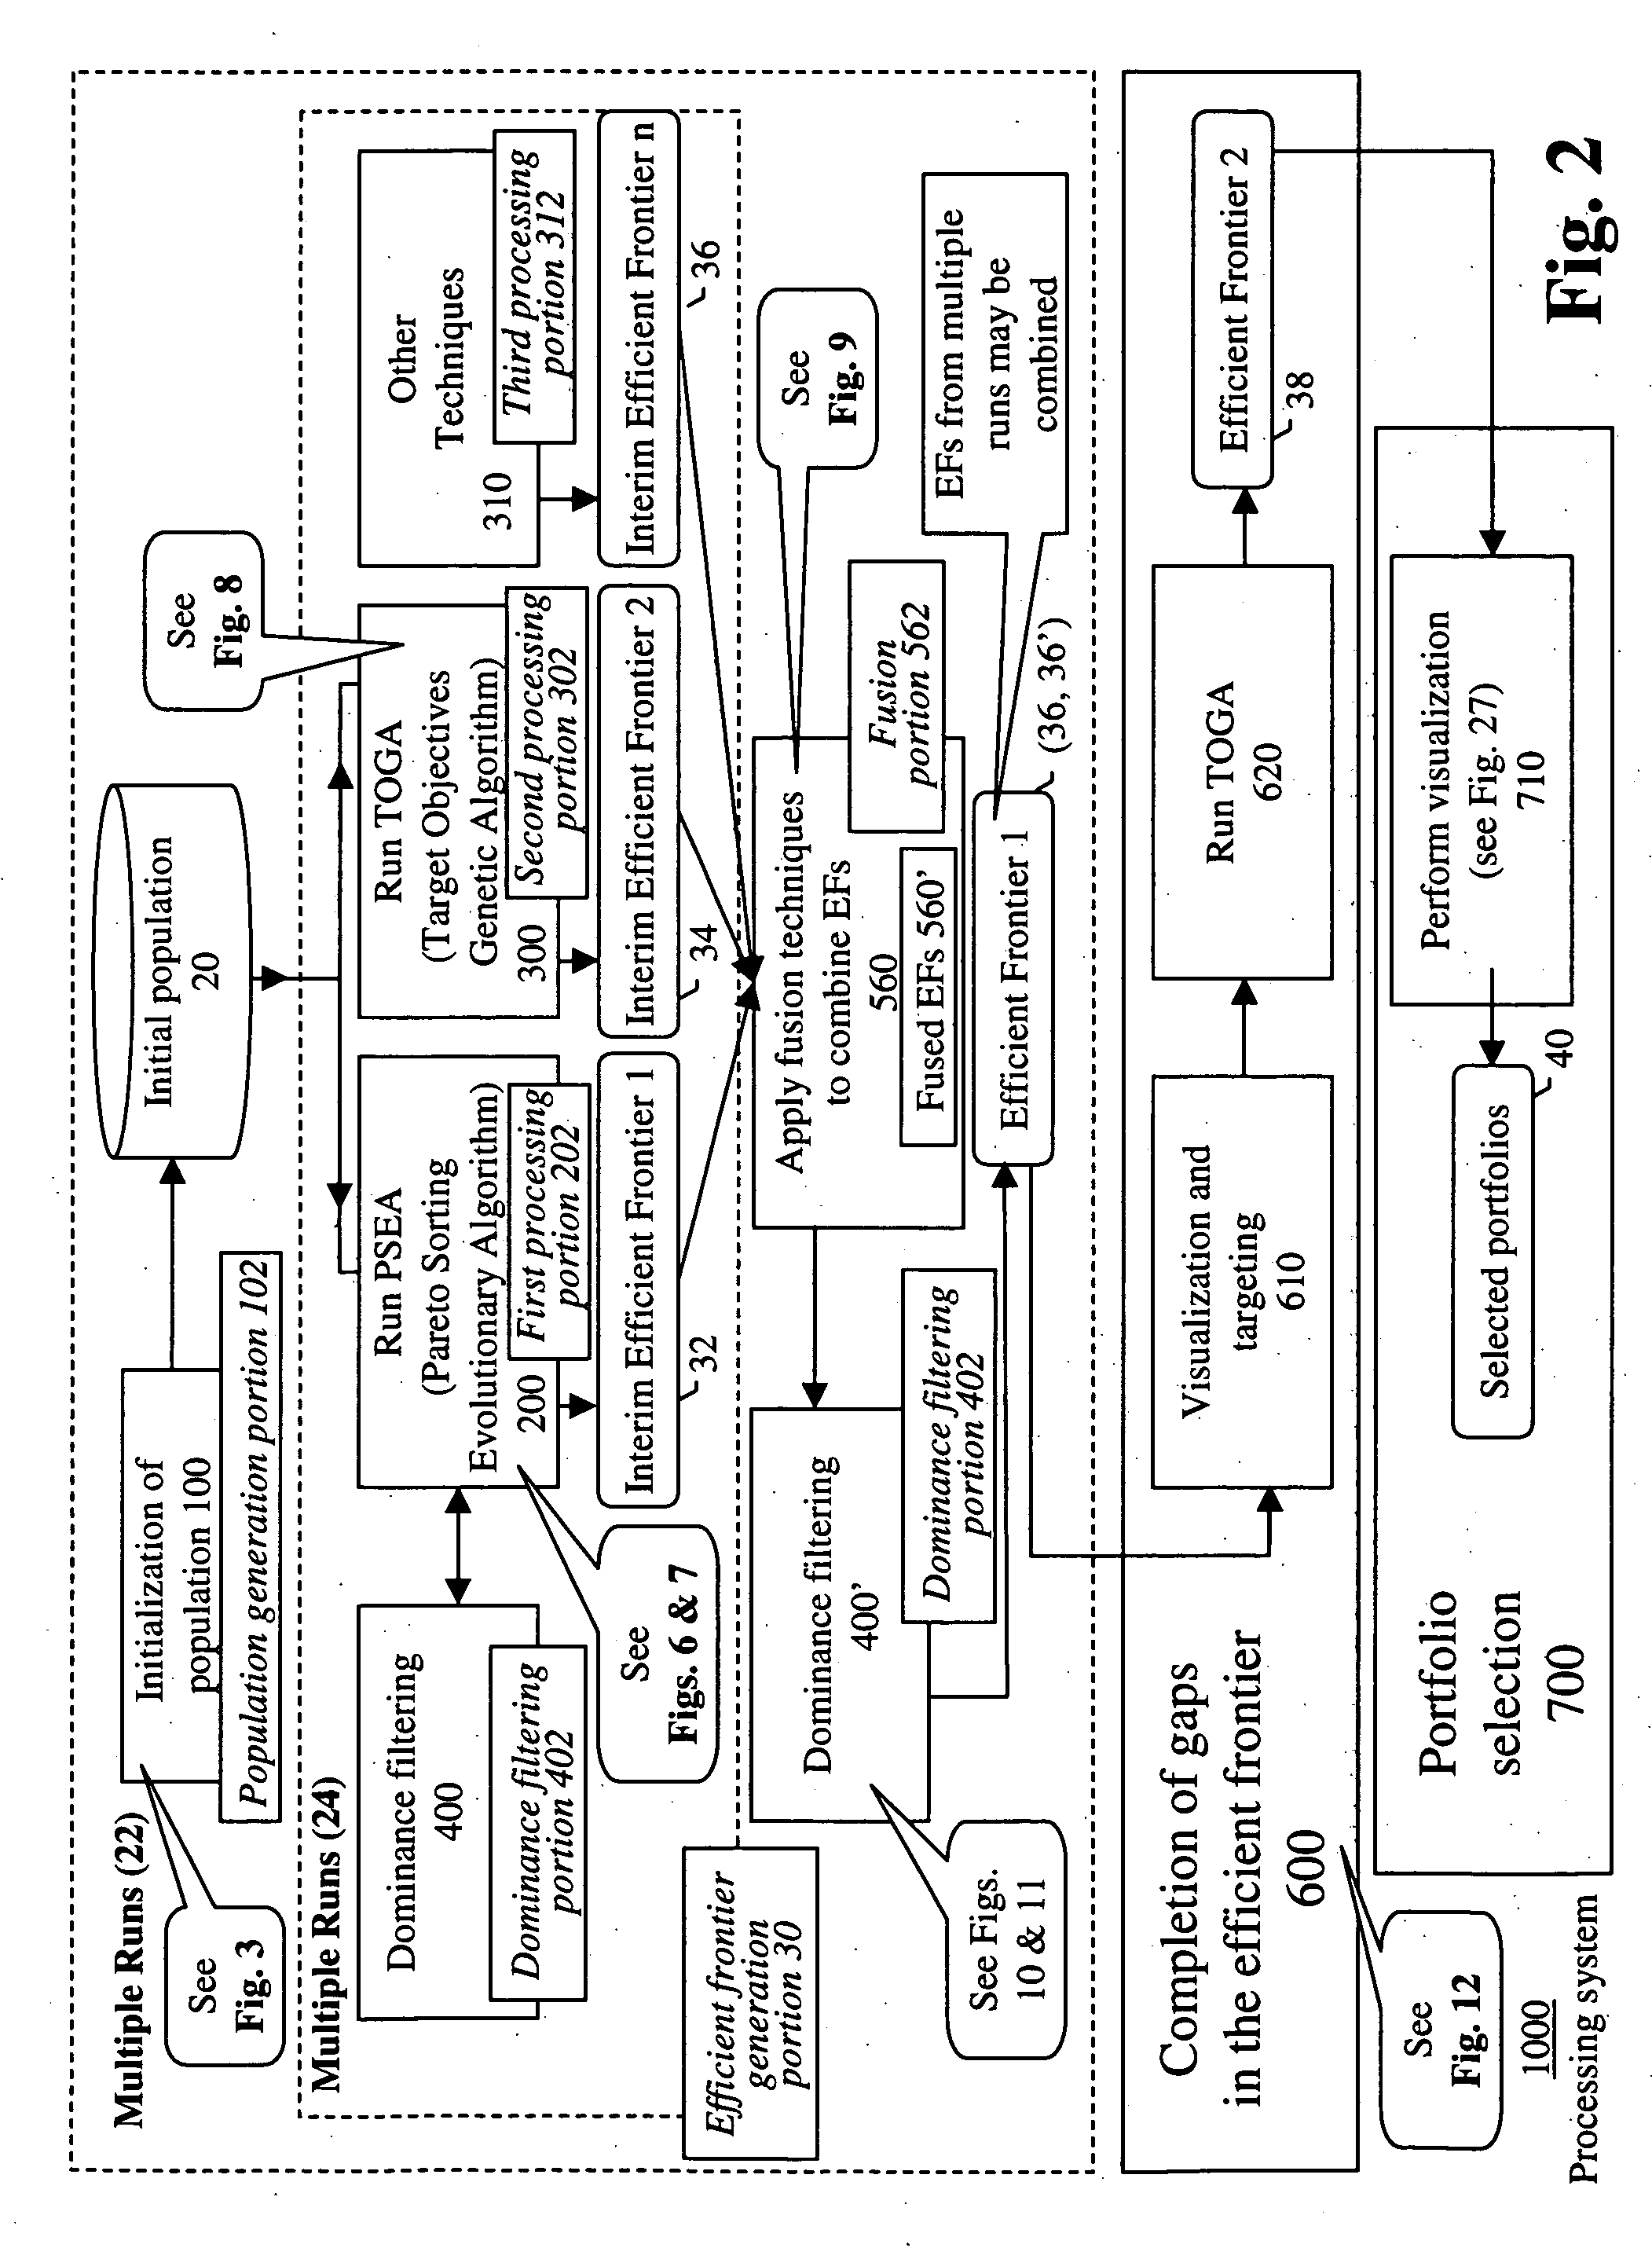 Systems and methods for multi-objective portfolio analysis using dominance filtering